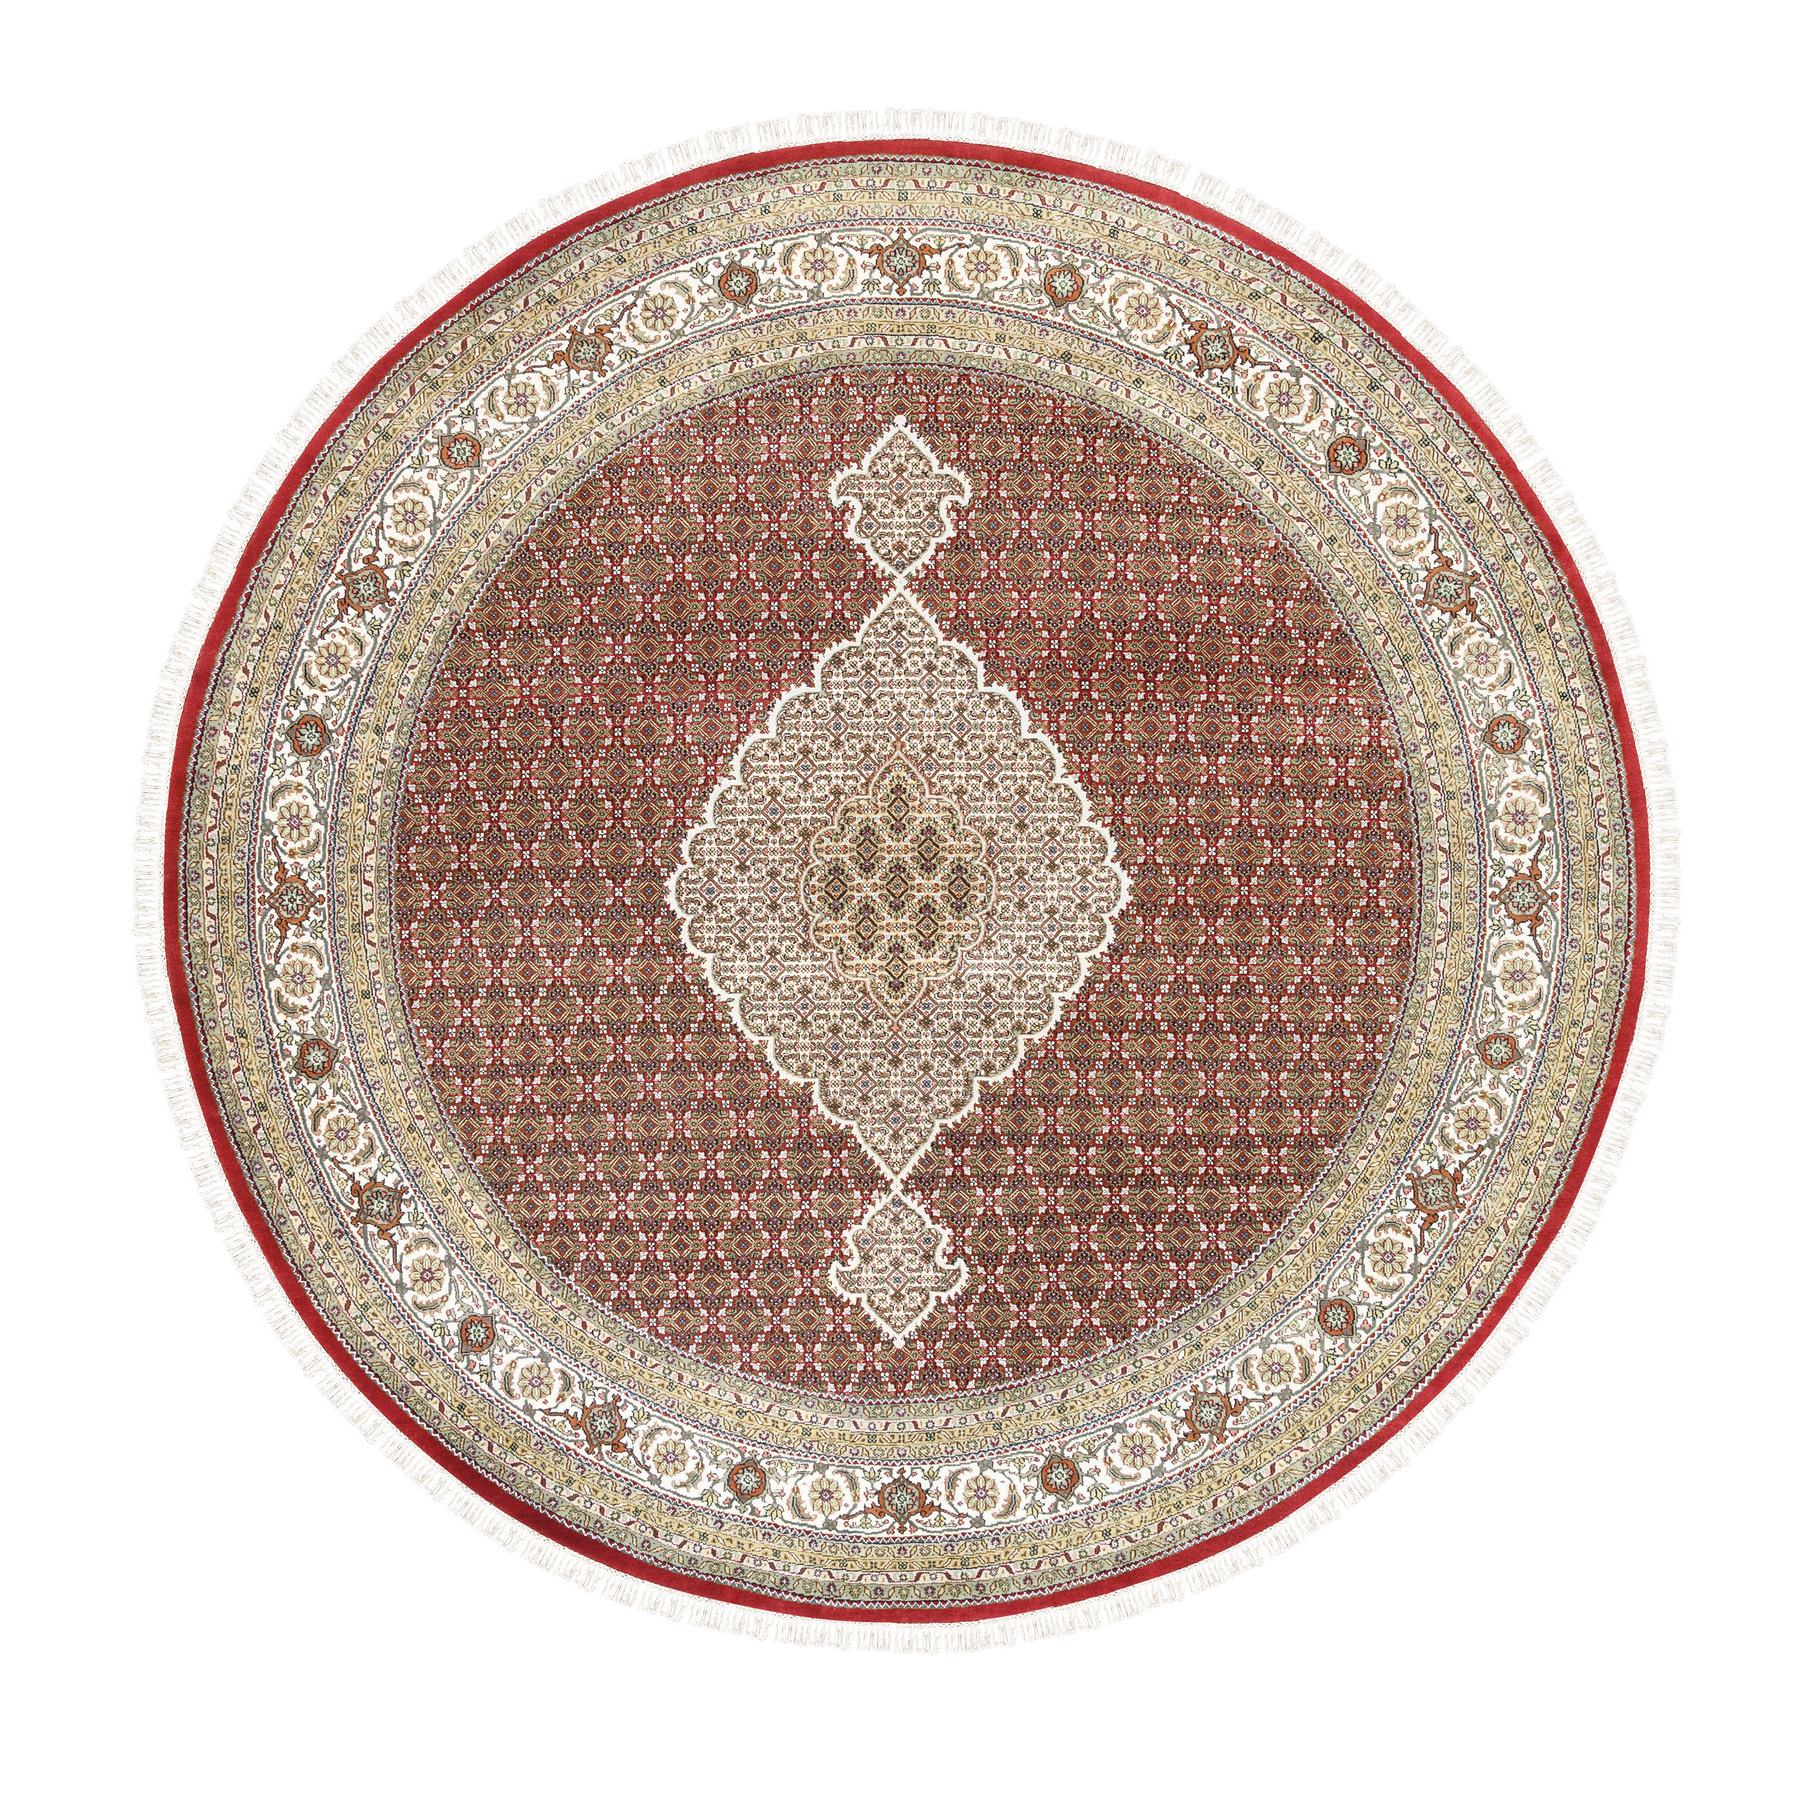 Pirniakan Collection Hand Knotted Red Rug No: 1125266